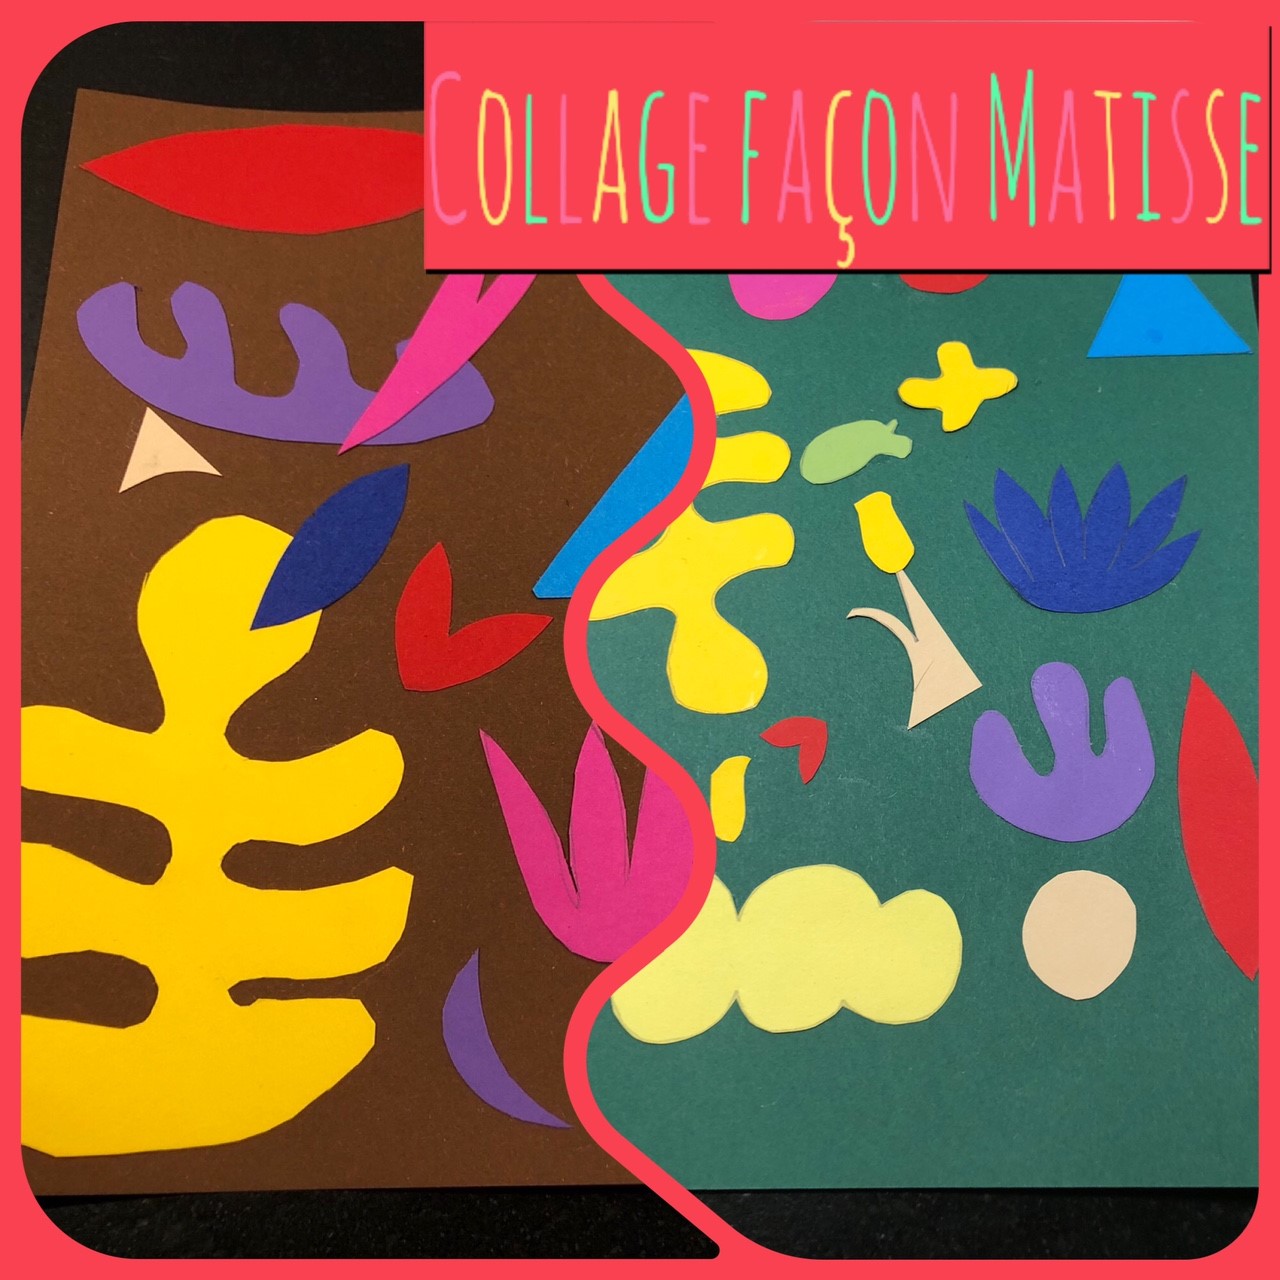 Ti'Créa_Collage-Matisse